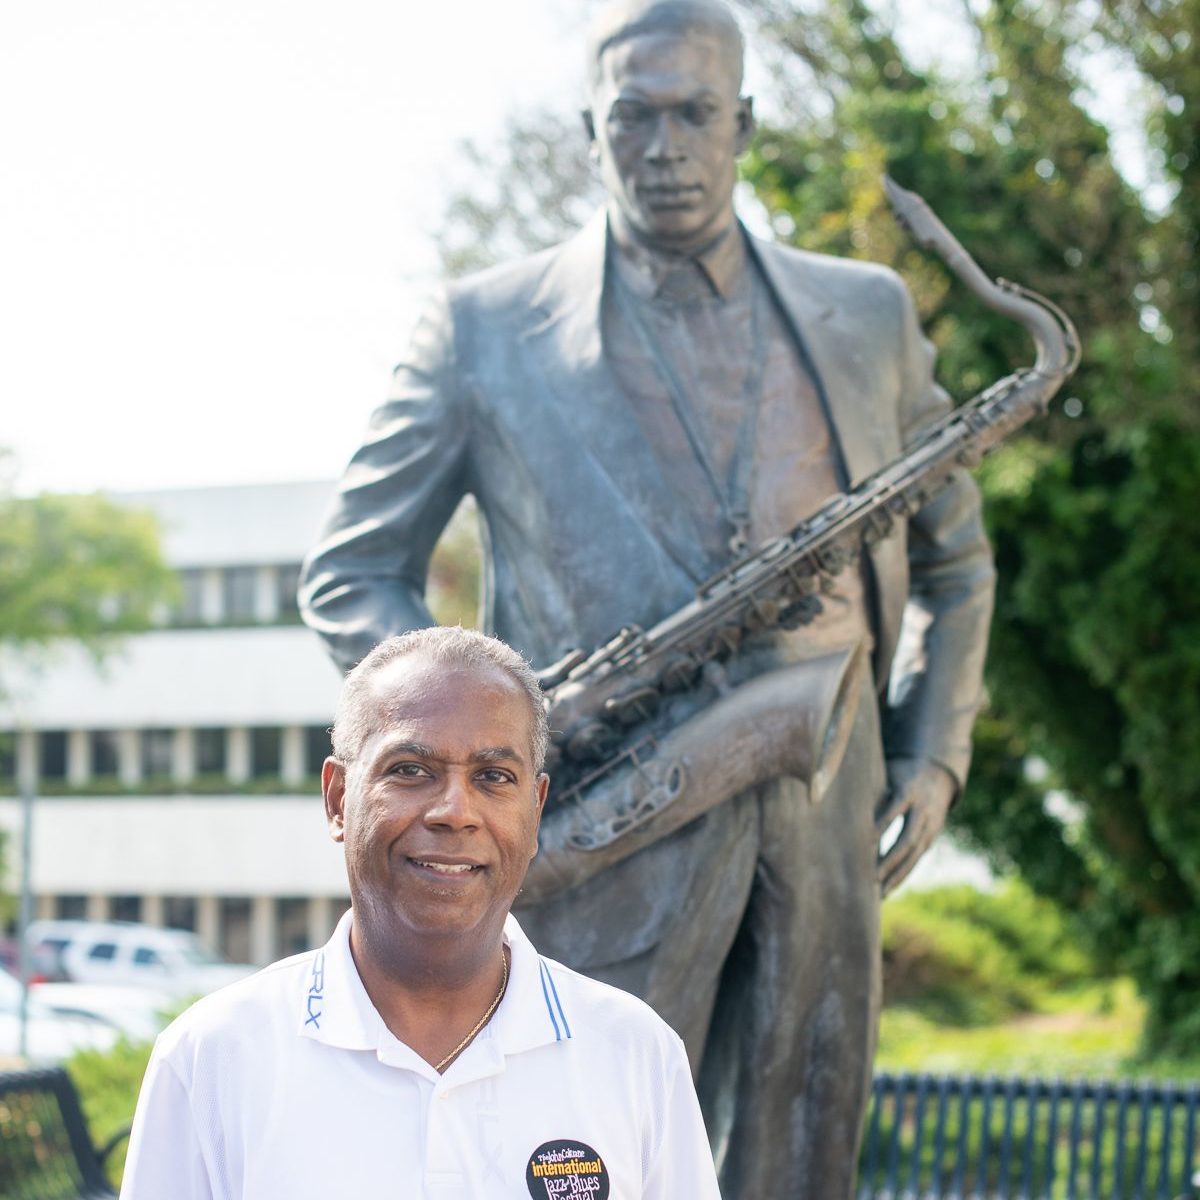 Joe Williams stands in front of a statue of John Coltrane in High Point, NC.